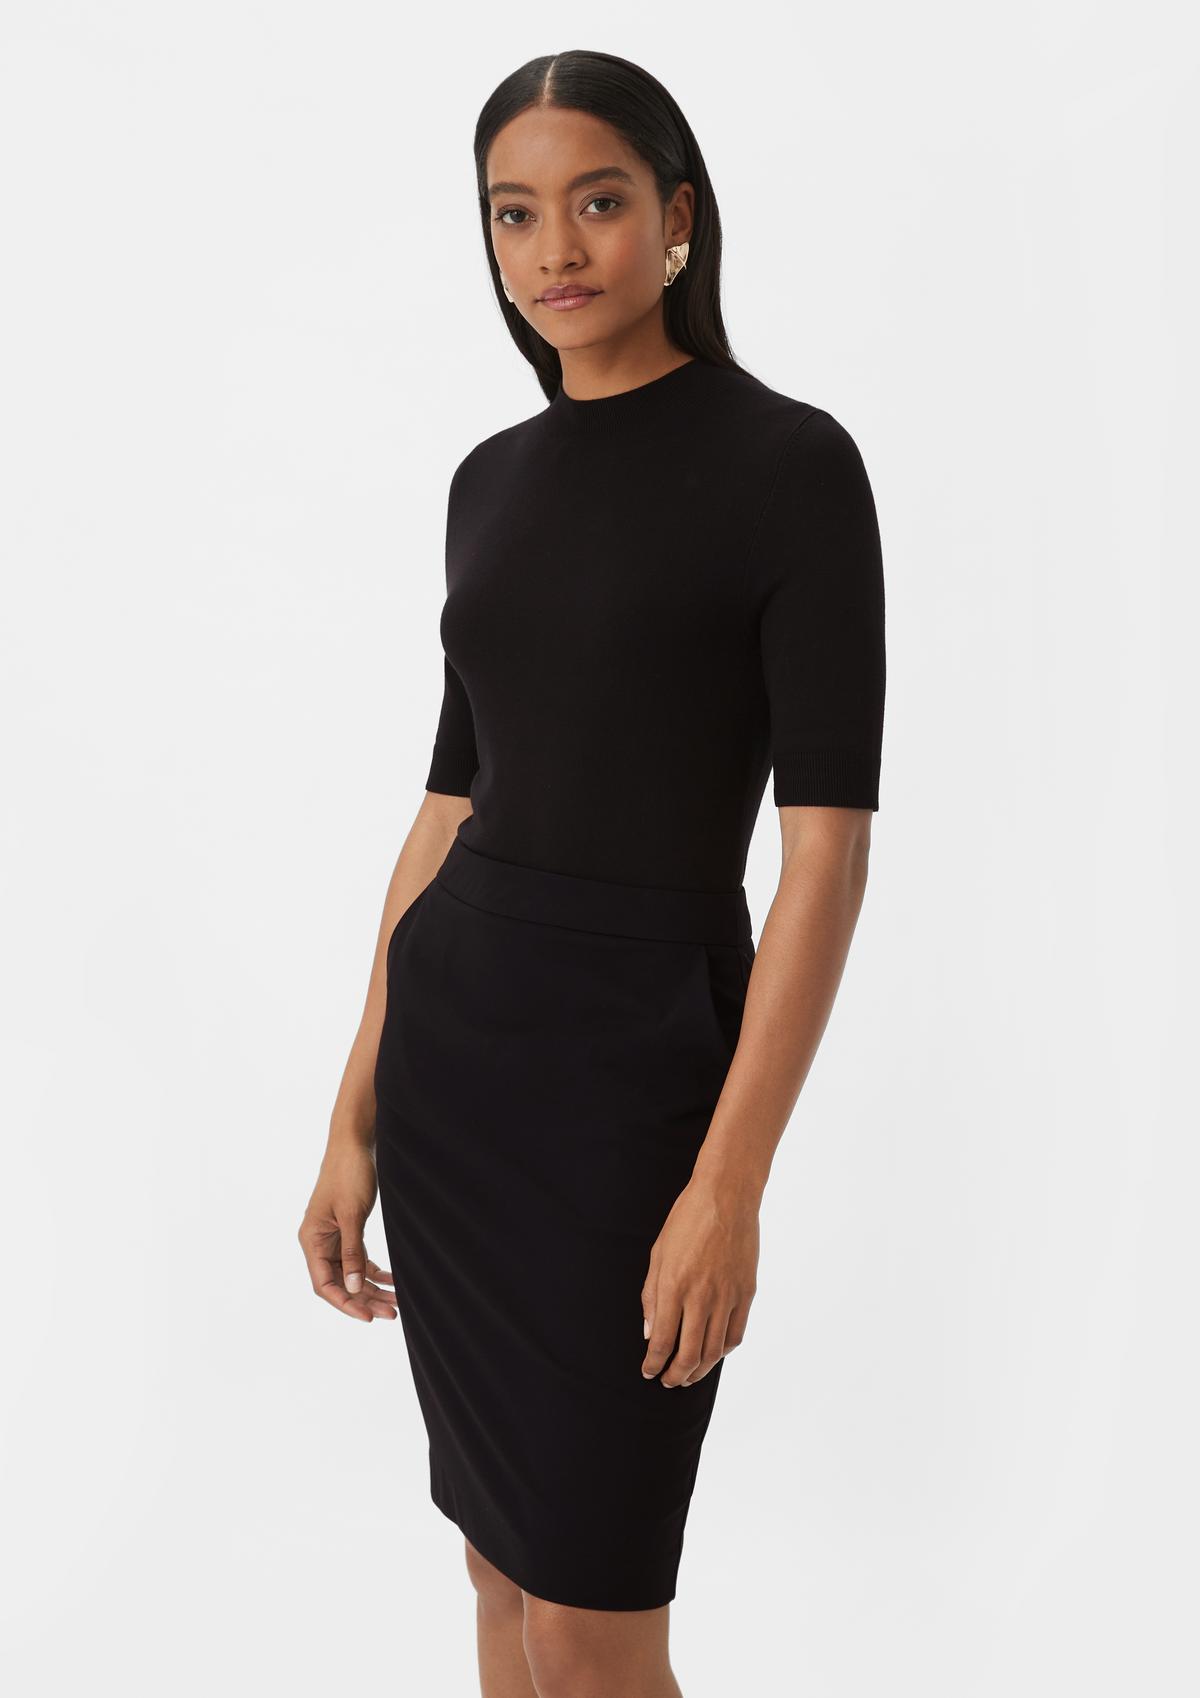 File:Turtleneck Bodycon Sweater Dress, Lace Tights, Gold Choker, and Ankle  Boots.jpg - Wikipedia